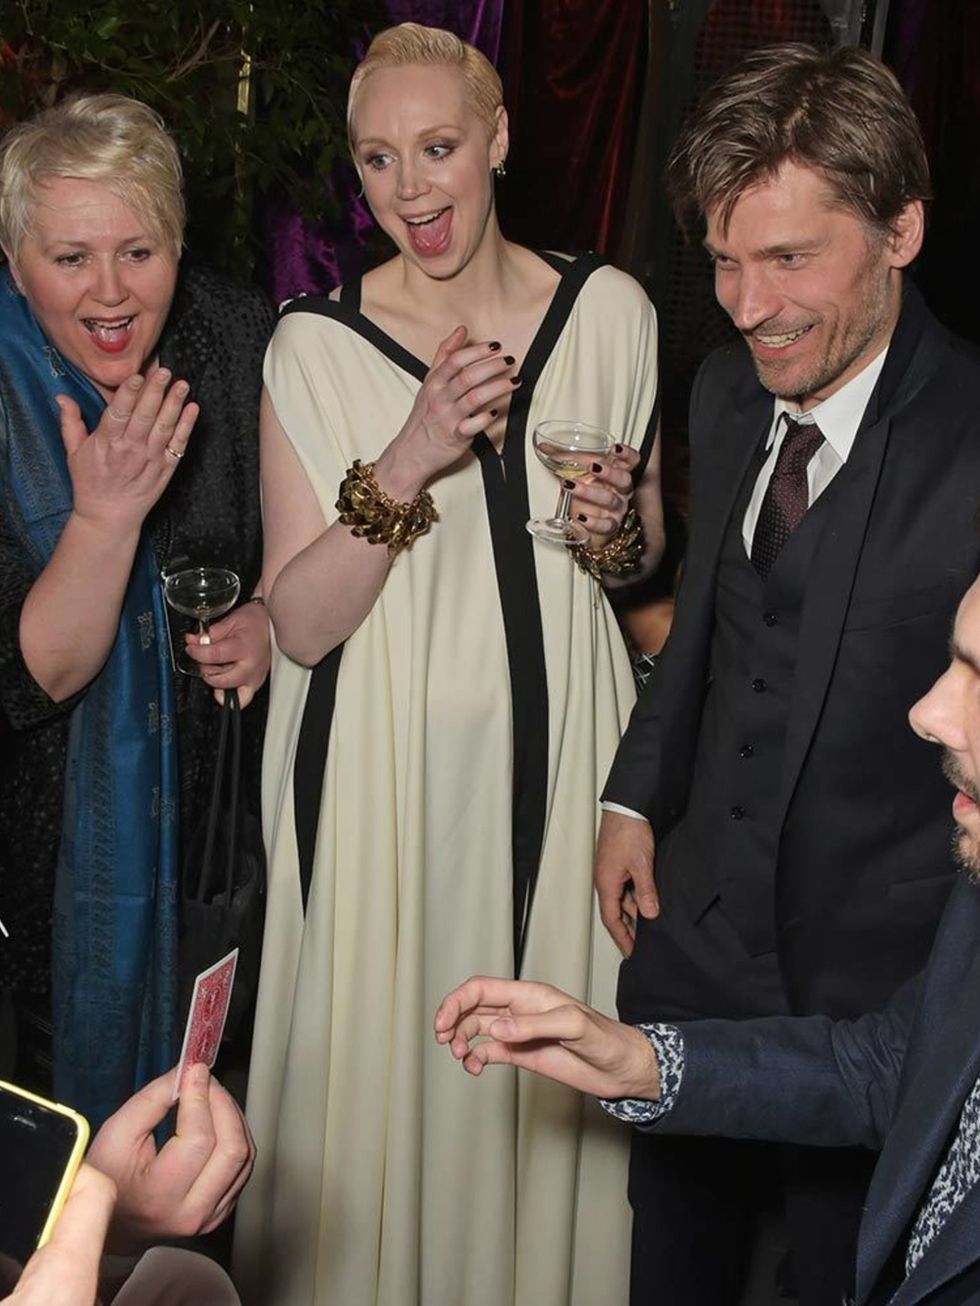 Giles Deacon, Gwendoline Christie, Nikolaj Coster-Waldau and Dynamo attend the 'Game Of Thrones: Season 5' UK Premiere After Party at the Tower of London, March 2015.